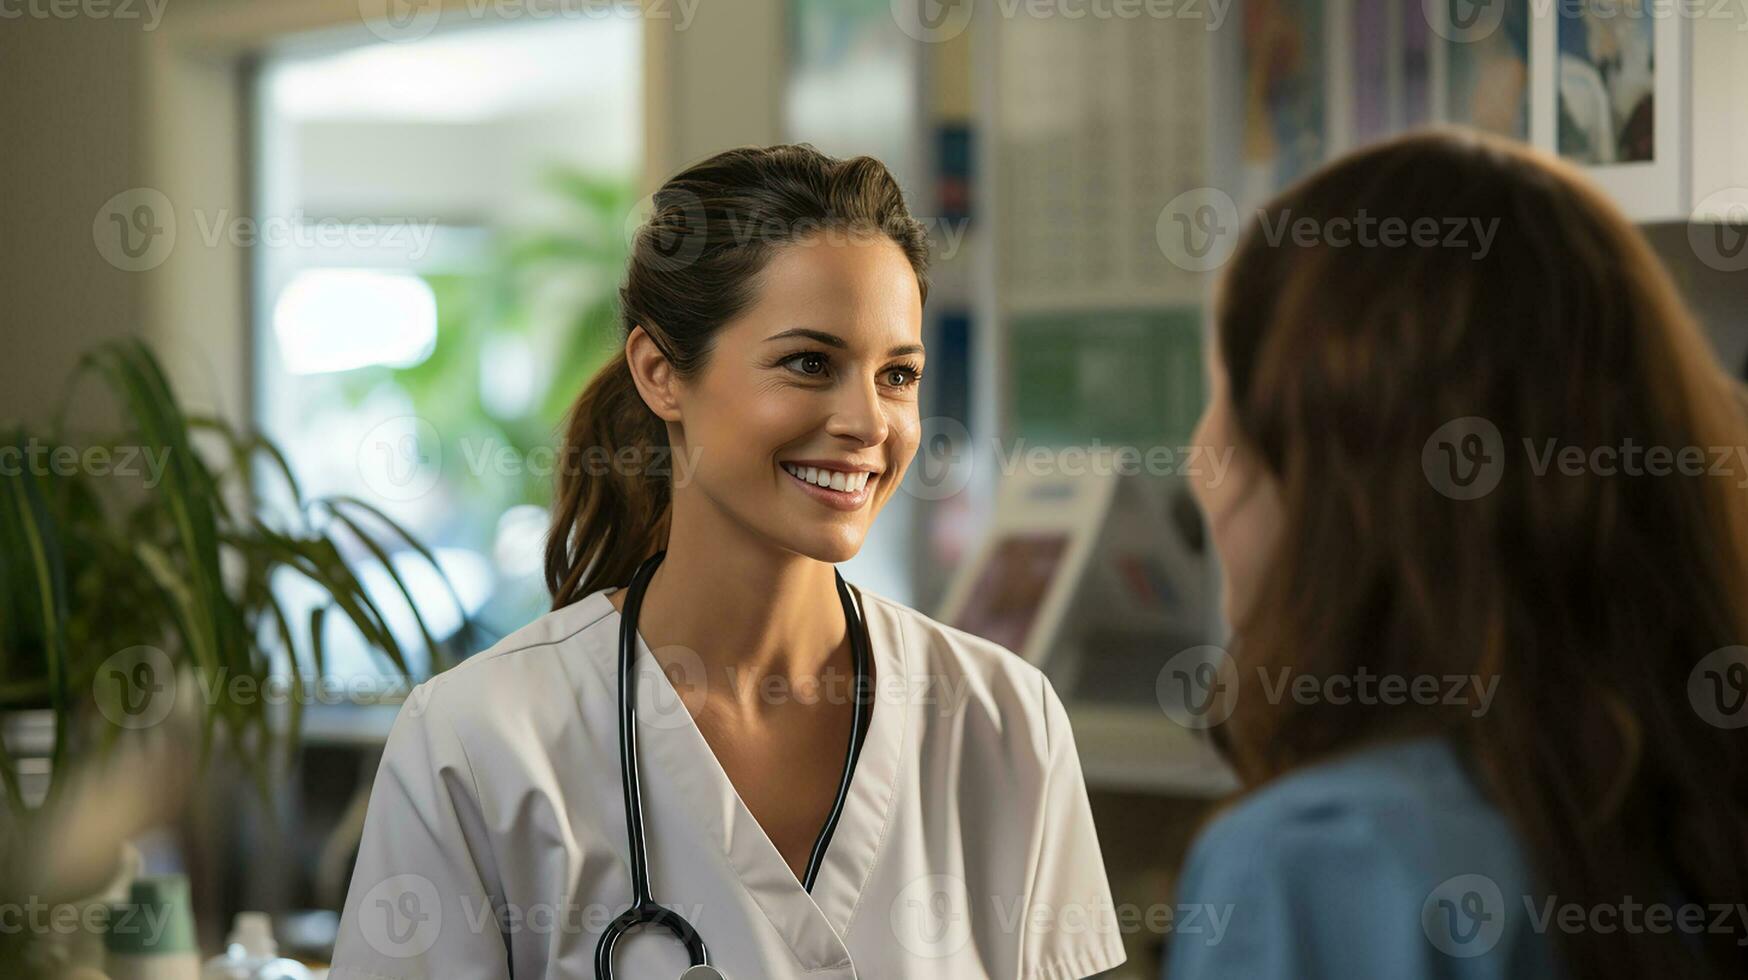 Female doctor with clipboard talking to smiling woman patient discussing something at hospital. Medicine and healthcare concepts. Generative AI photo